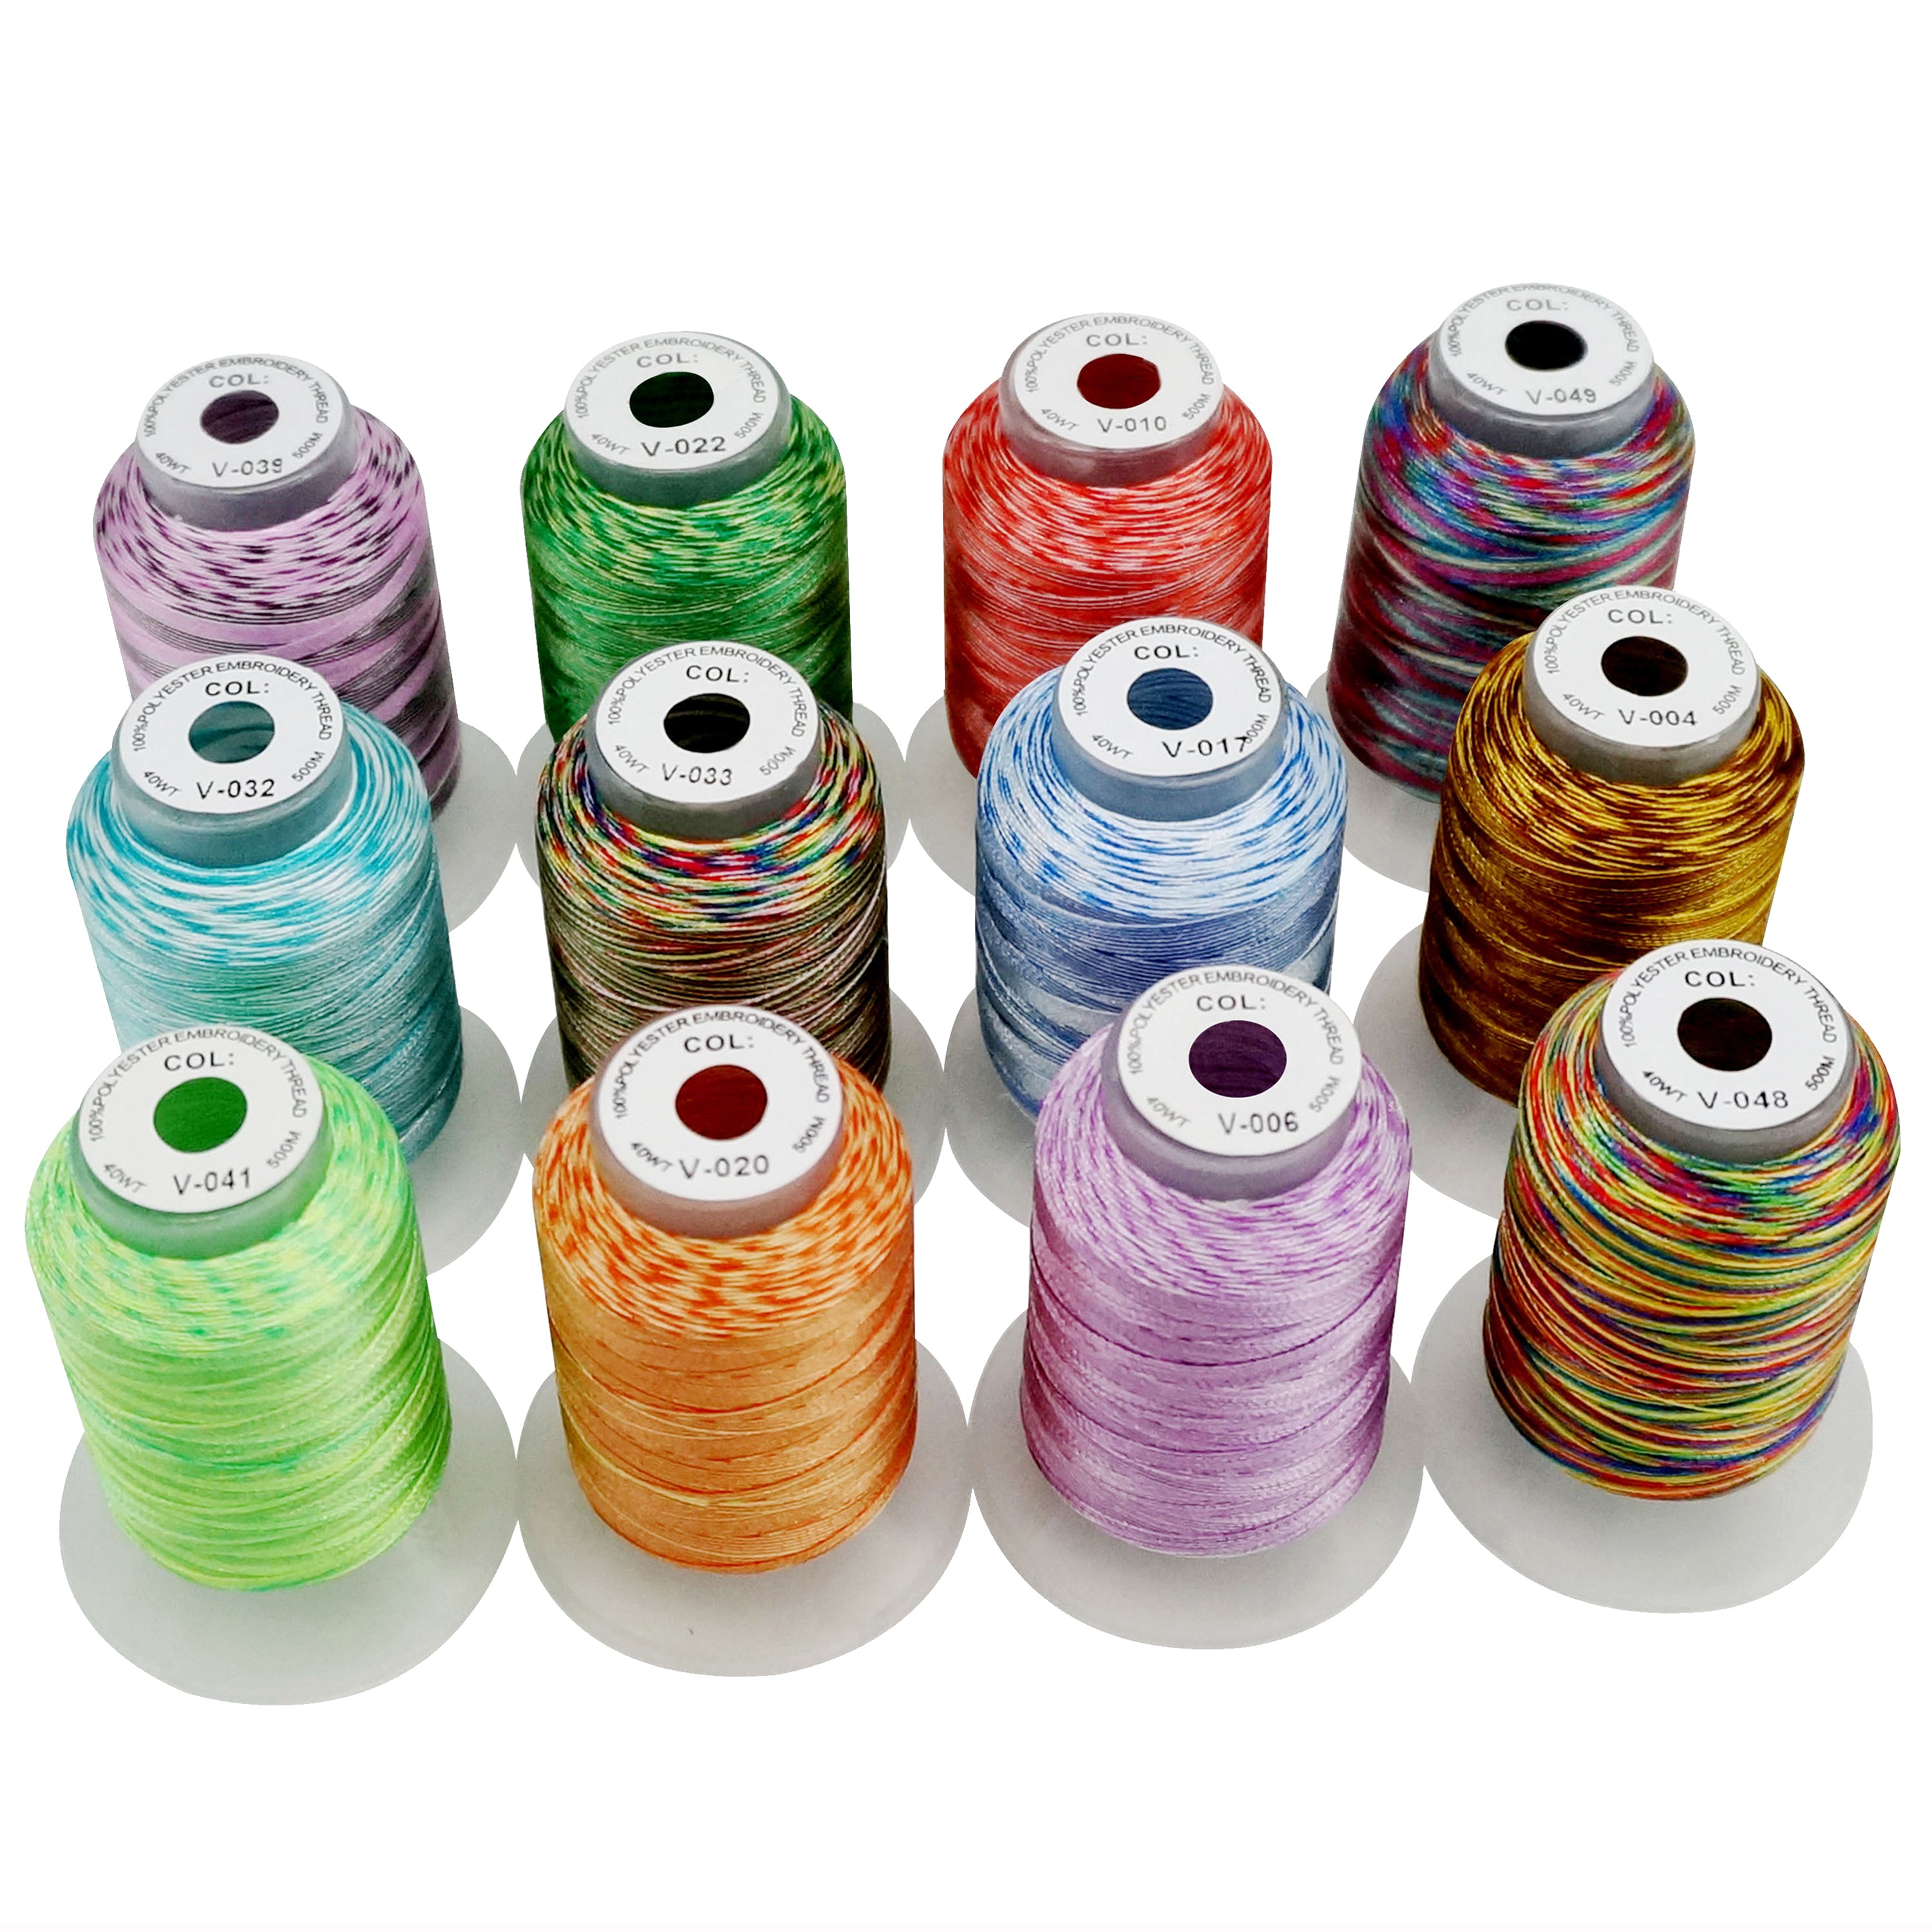 New brothread 40 Brother Colors Polyester Machine Embroidery Thread Kit 500M